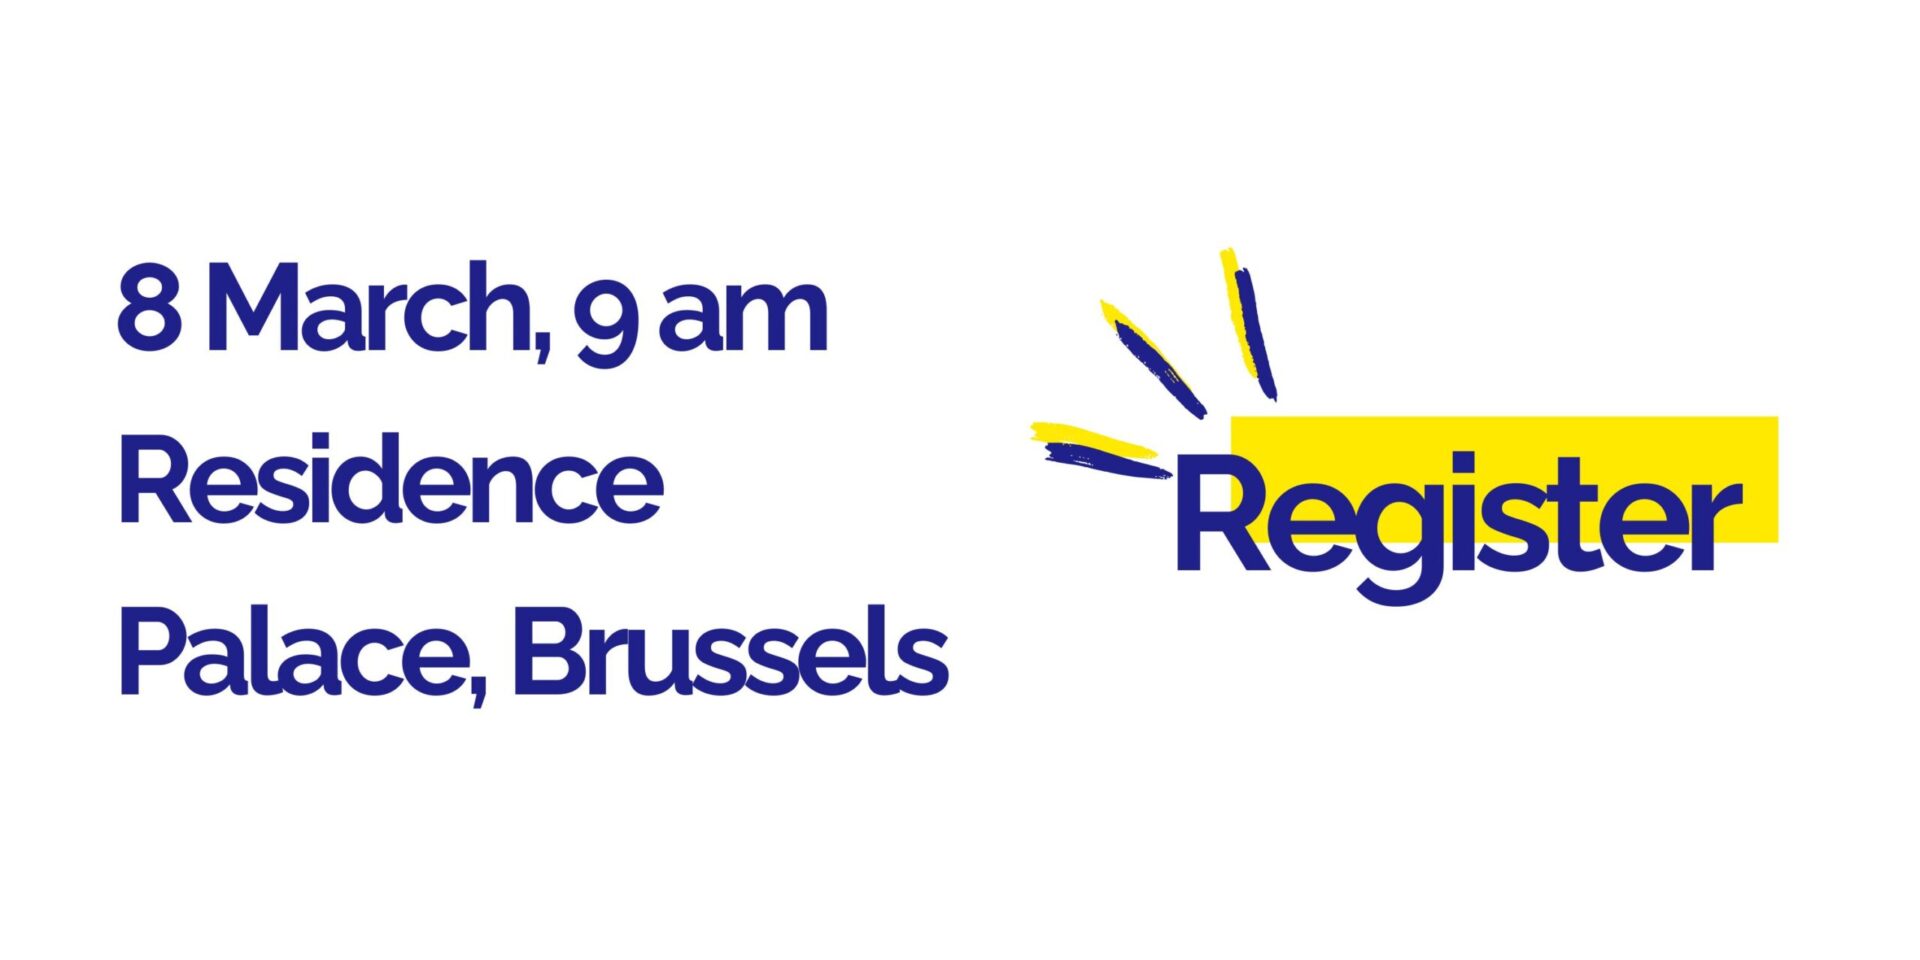 Join us on 8 March, 9am, Residence Palace, Brussels.